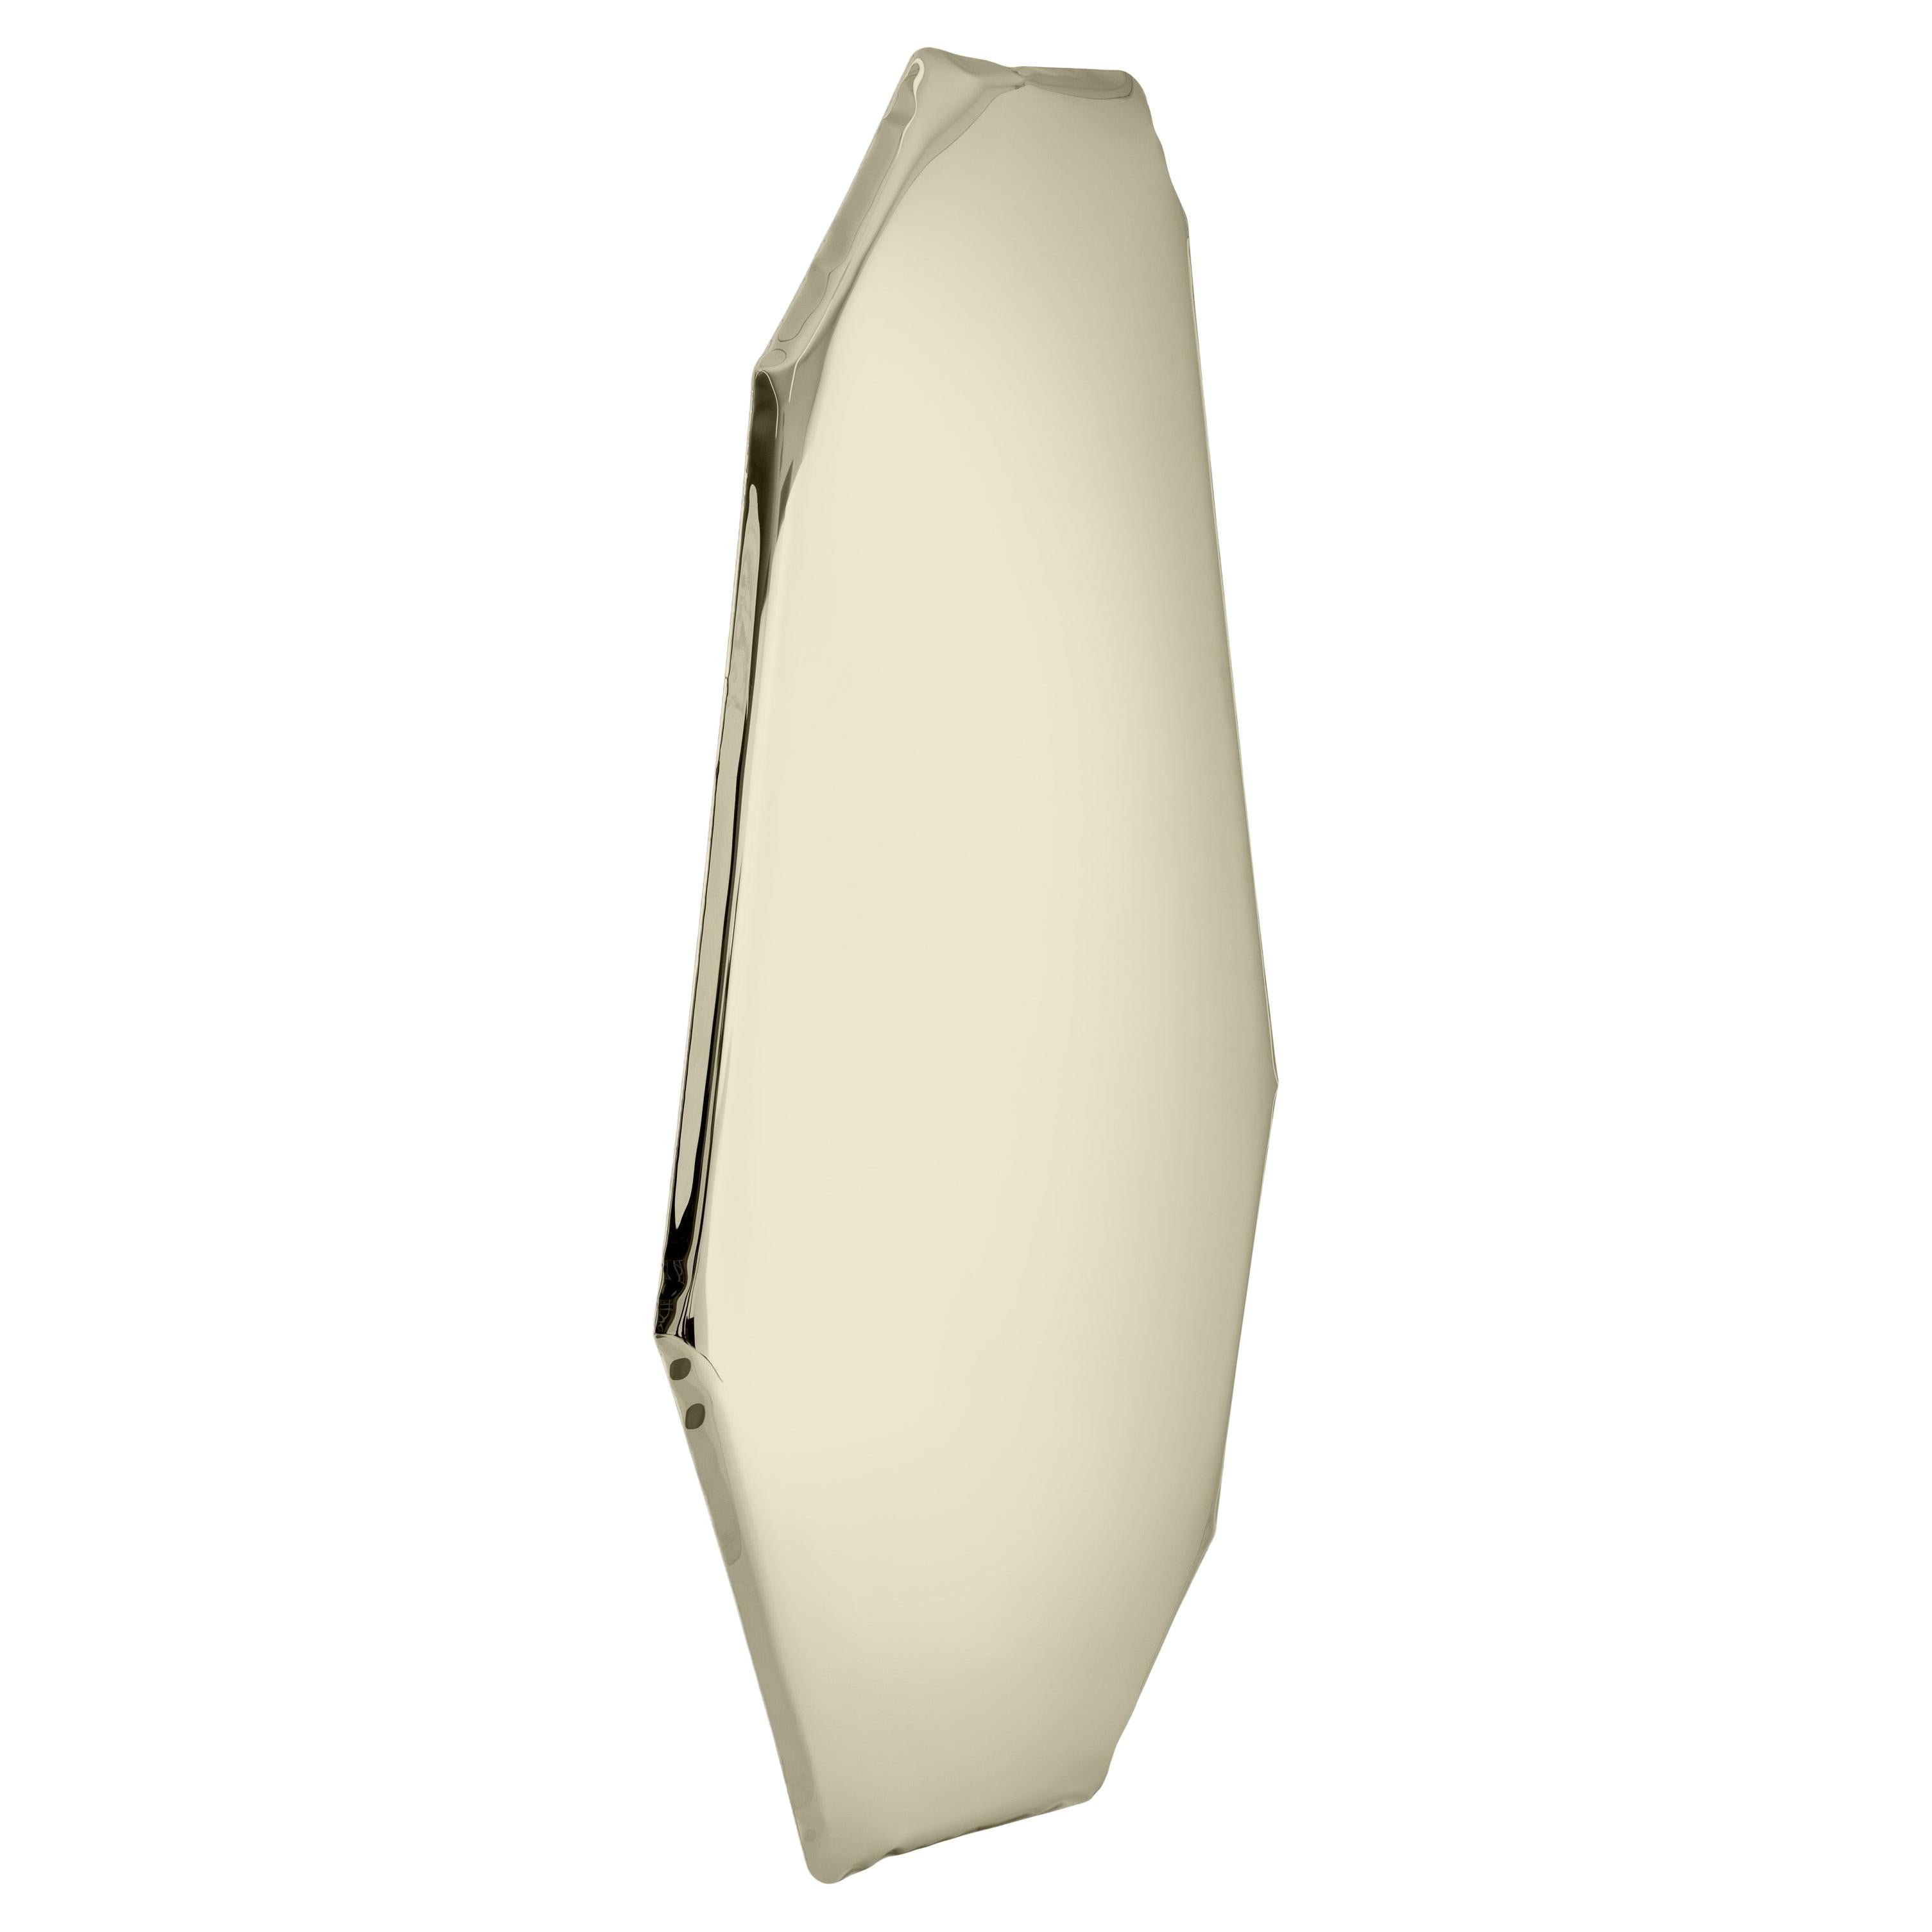 Tafla C1 Polished Stainless Steel Light Gold Color Wall Mirror by Zieta